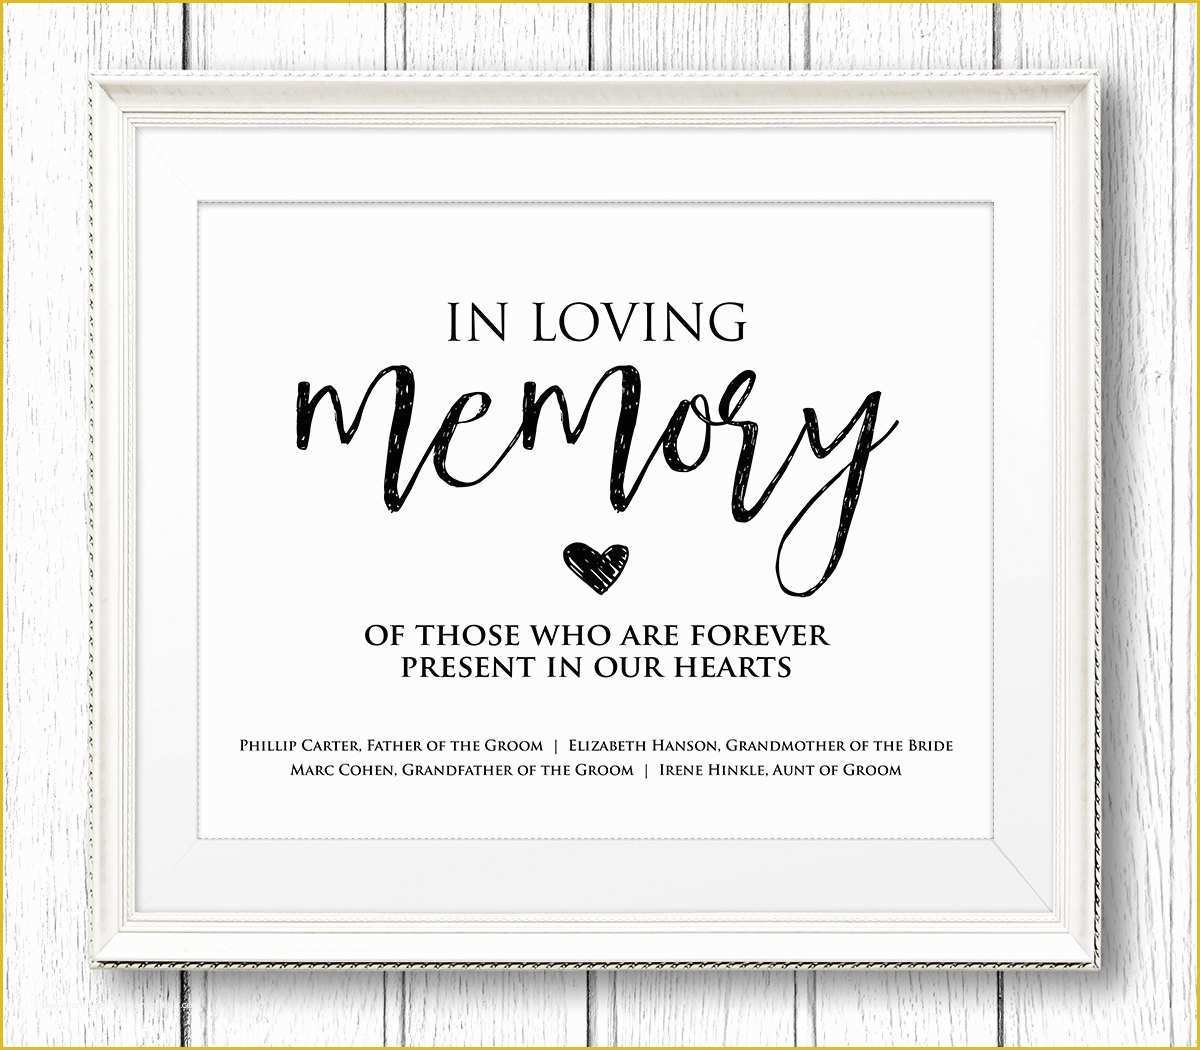 52-in-loving-memory-template-free-heritagechristiancollege